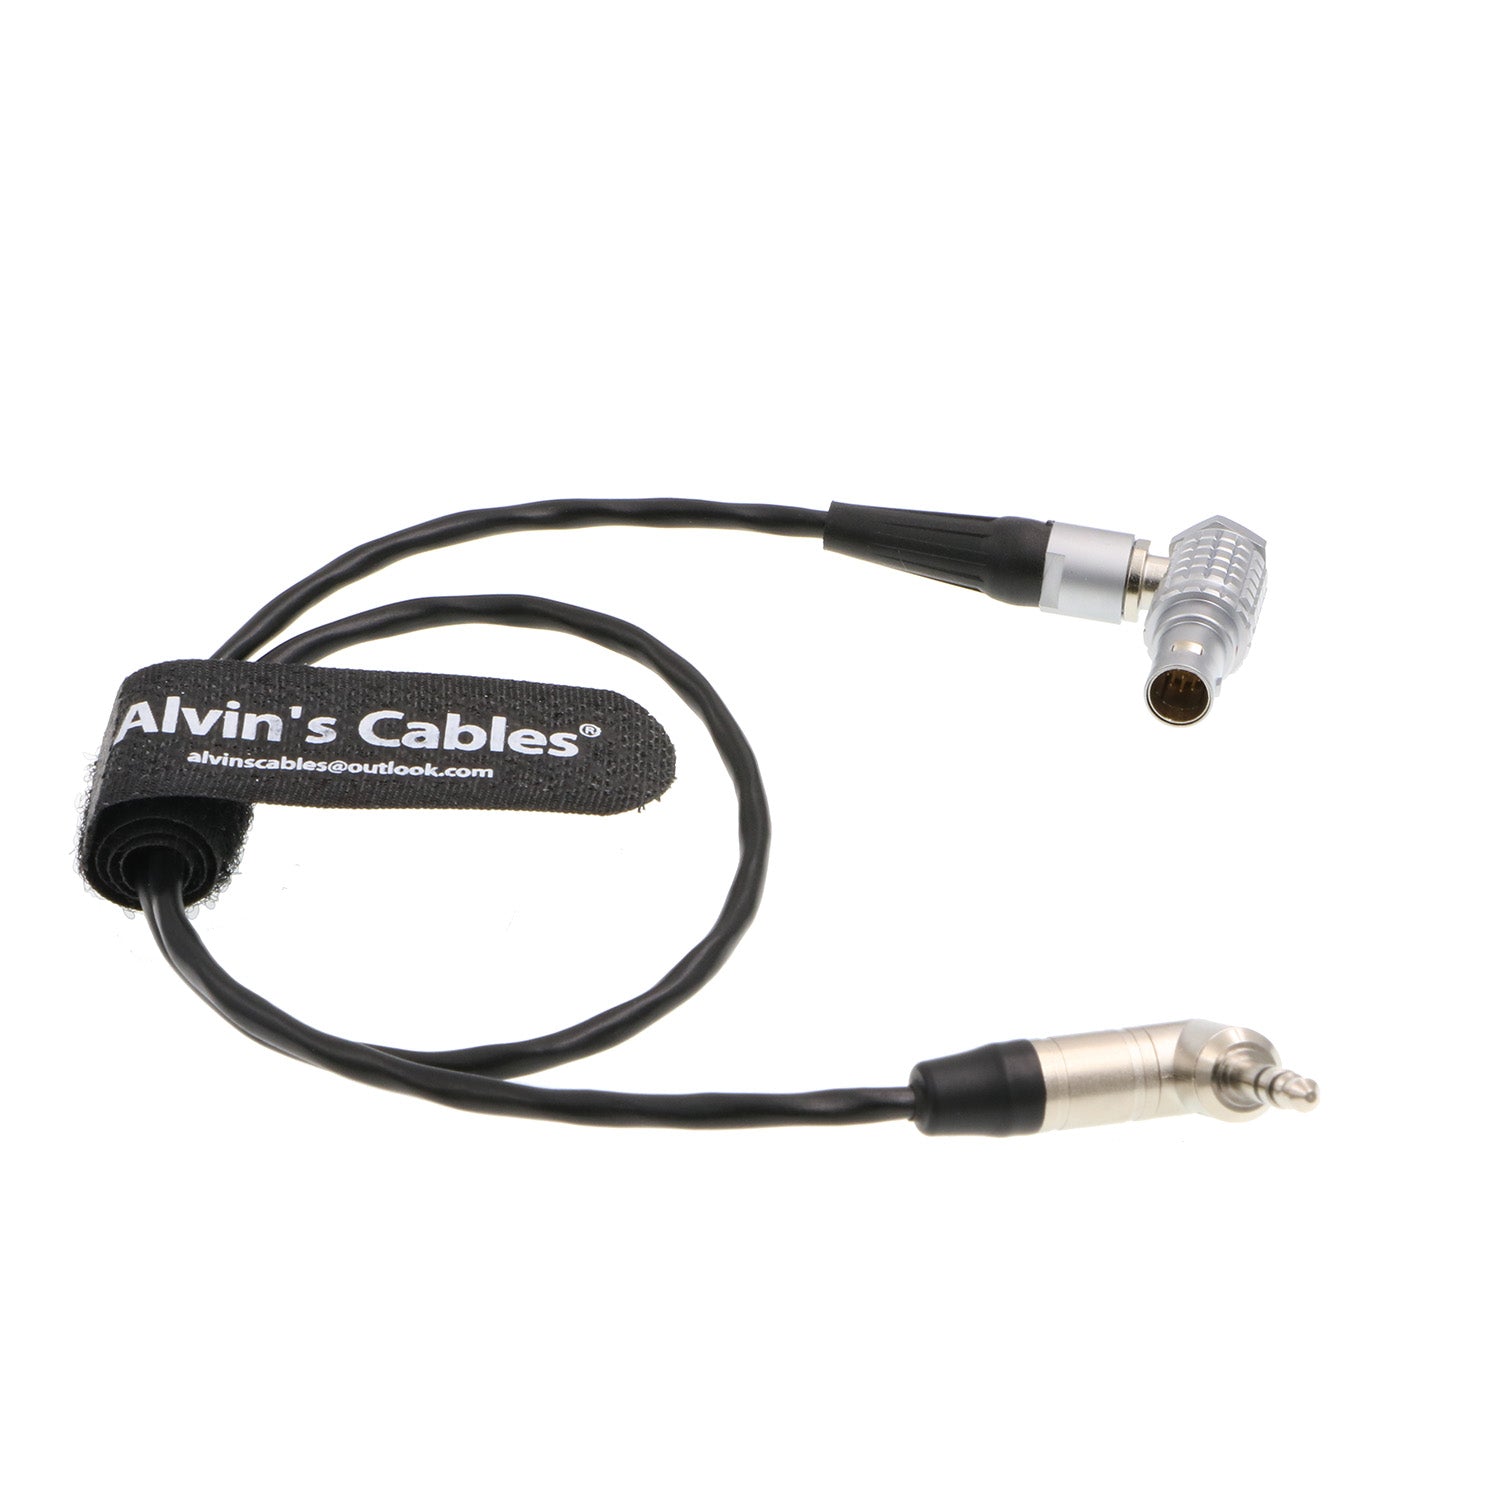 Alvin's Cables Red Komodo Timecode Kabel Tentacle Sync 3,5 mm TRS auf EXT 9 Pin Stecker